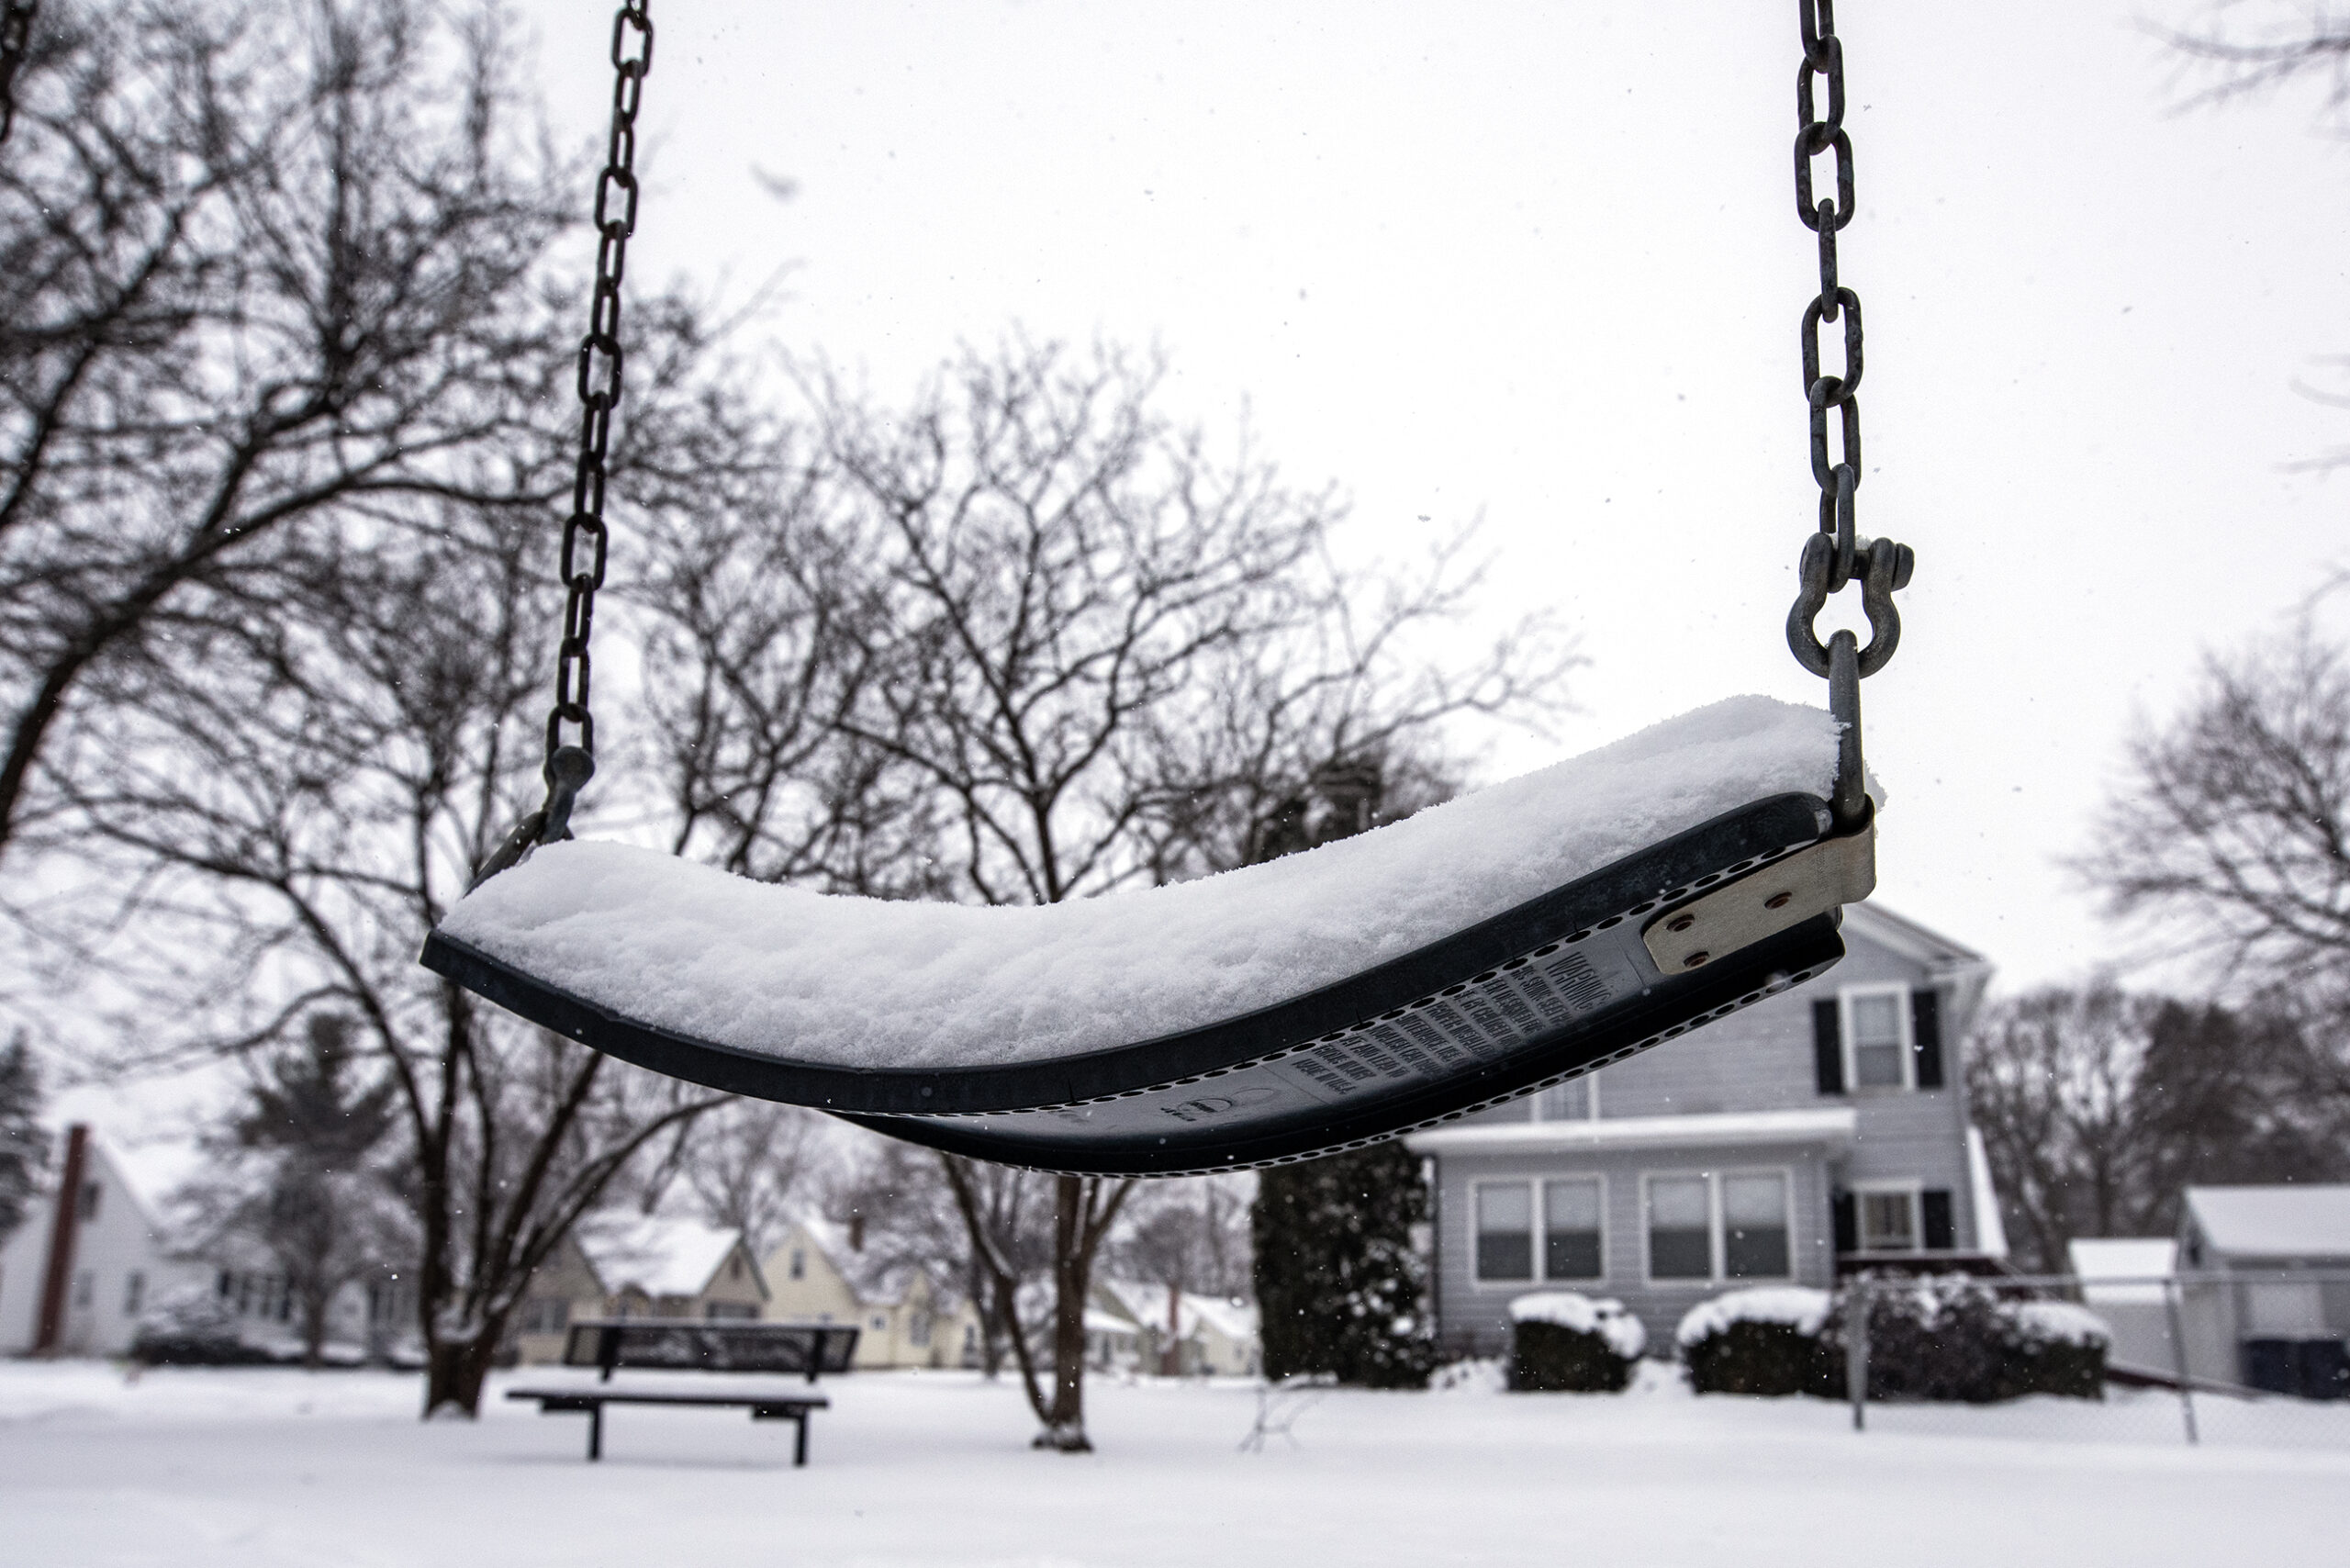 From ski hills to the world’s largest potato masher, Wisconsin can be fun in winter